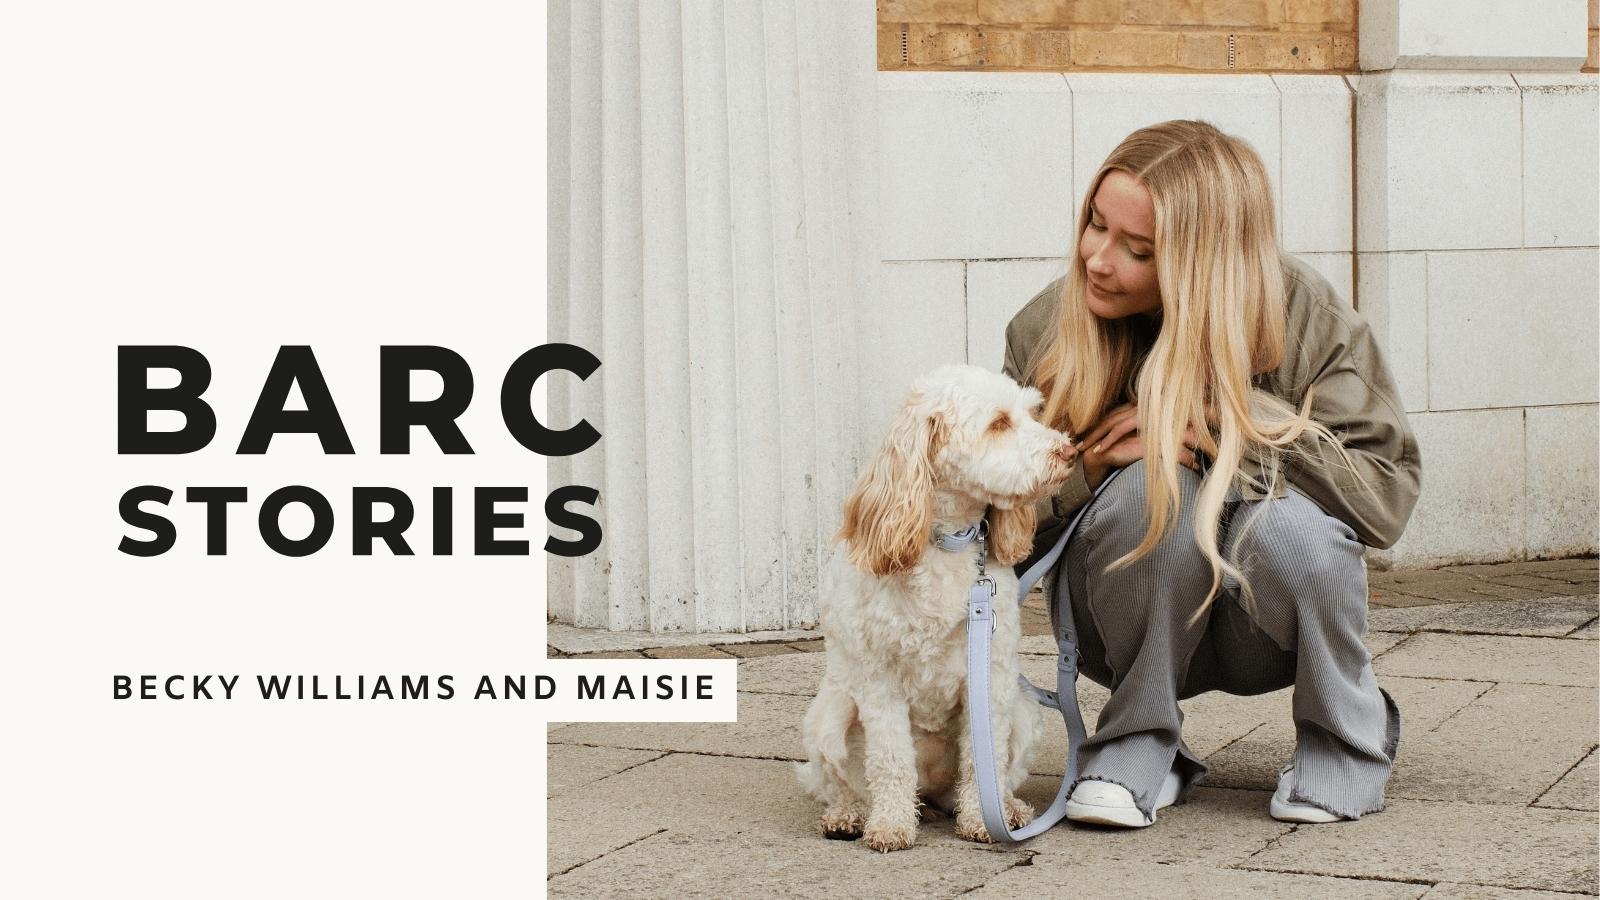 The first of 'Barc Stories' with Becky Williams and her dog Maisie